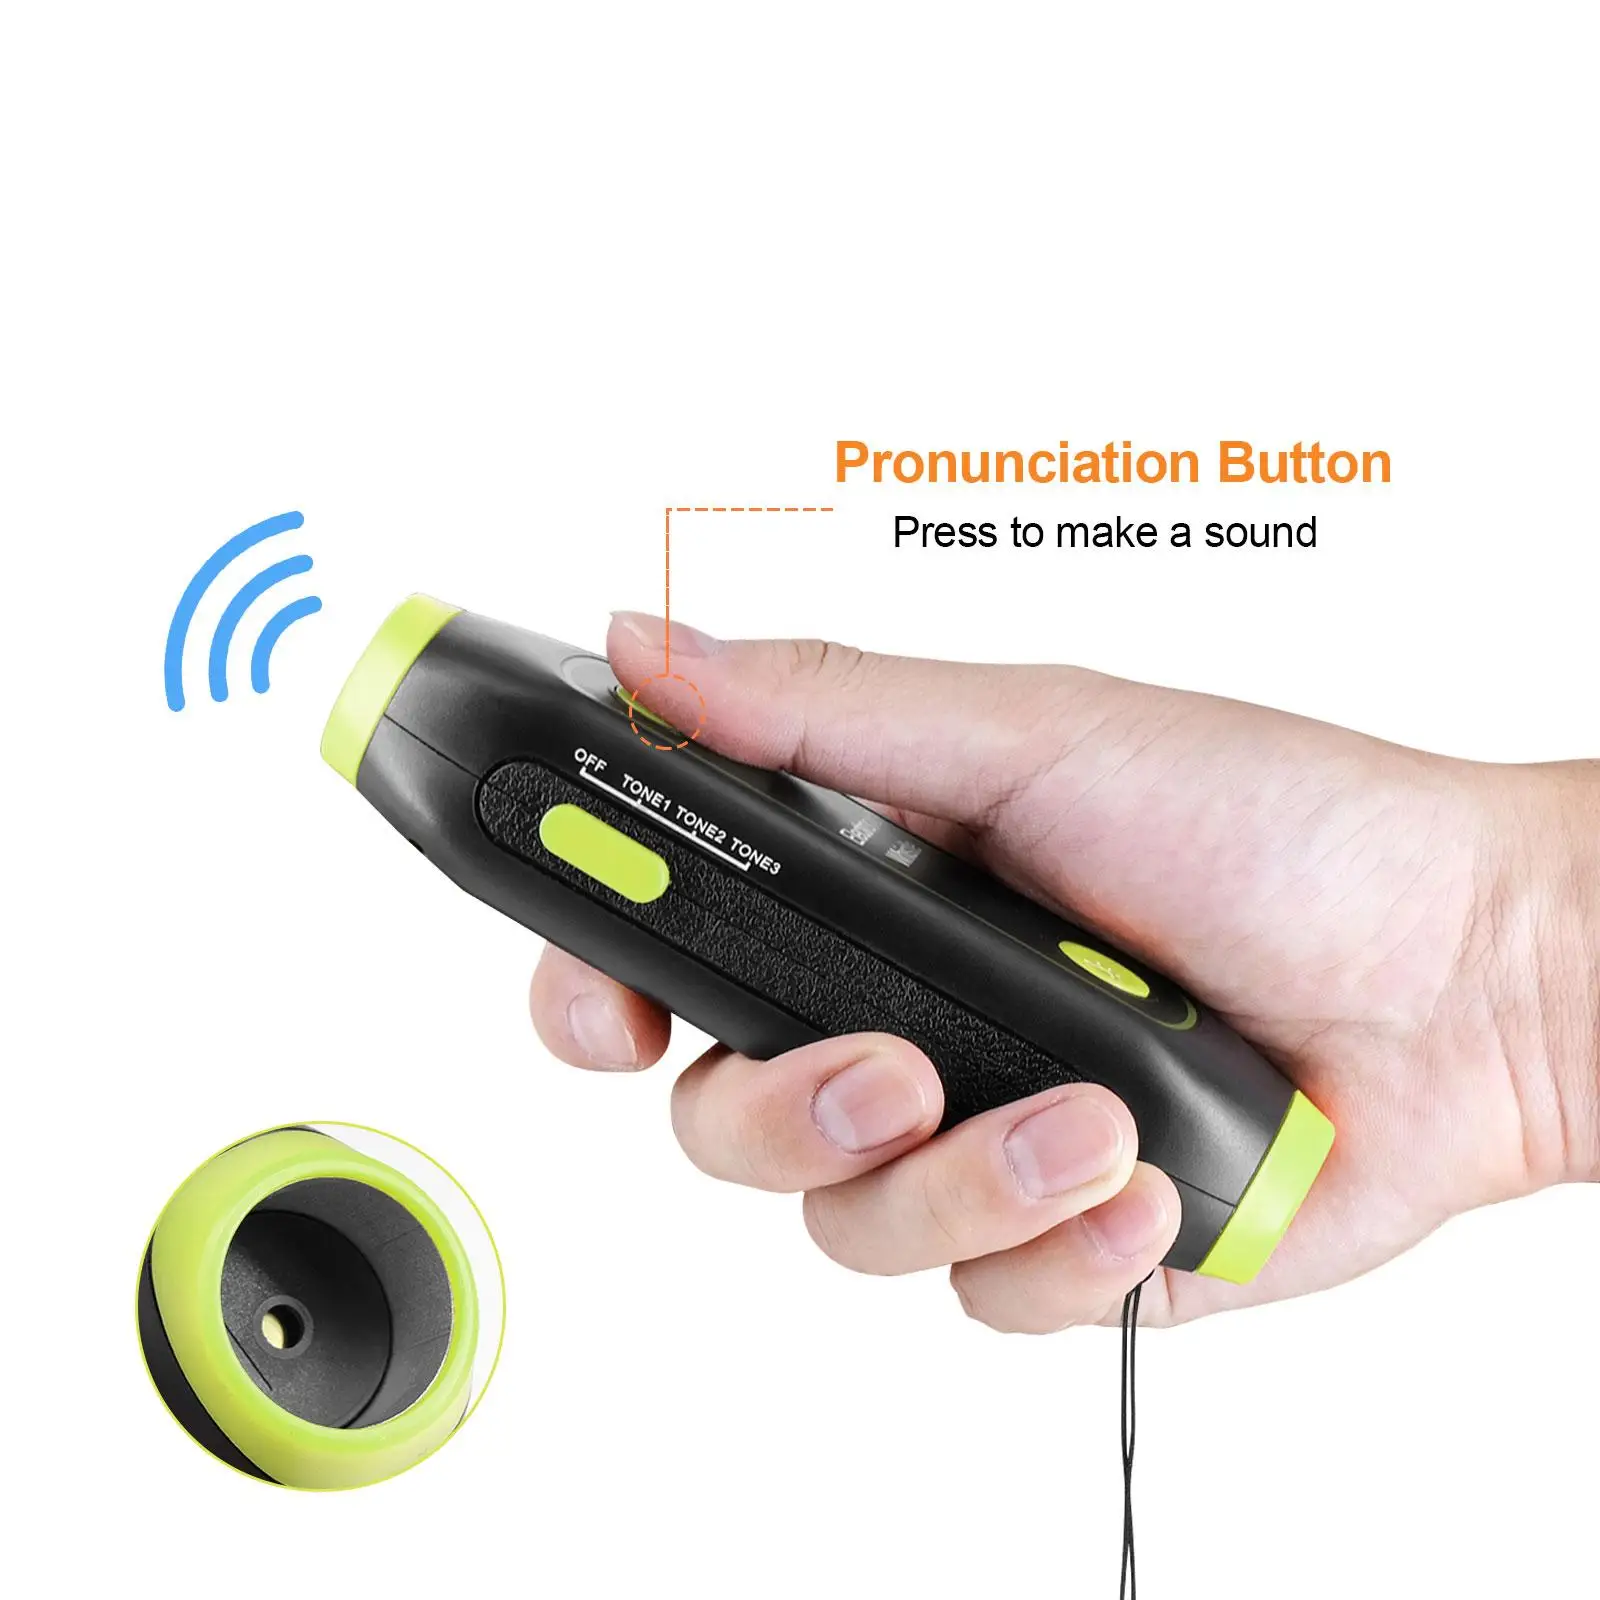 Lightweight Handheld Electric Whistle 3 Modes for Survival Football Soccer